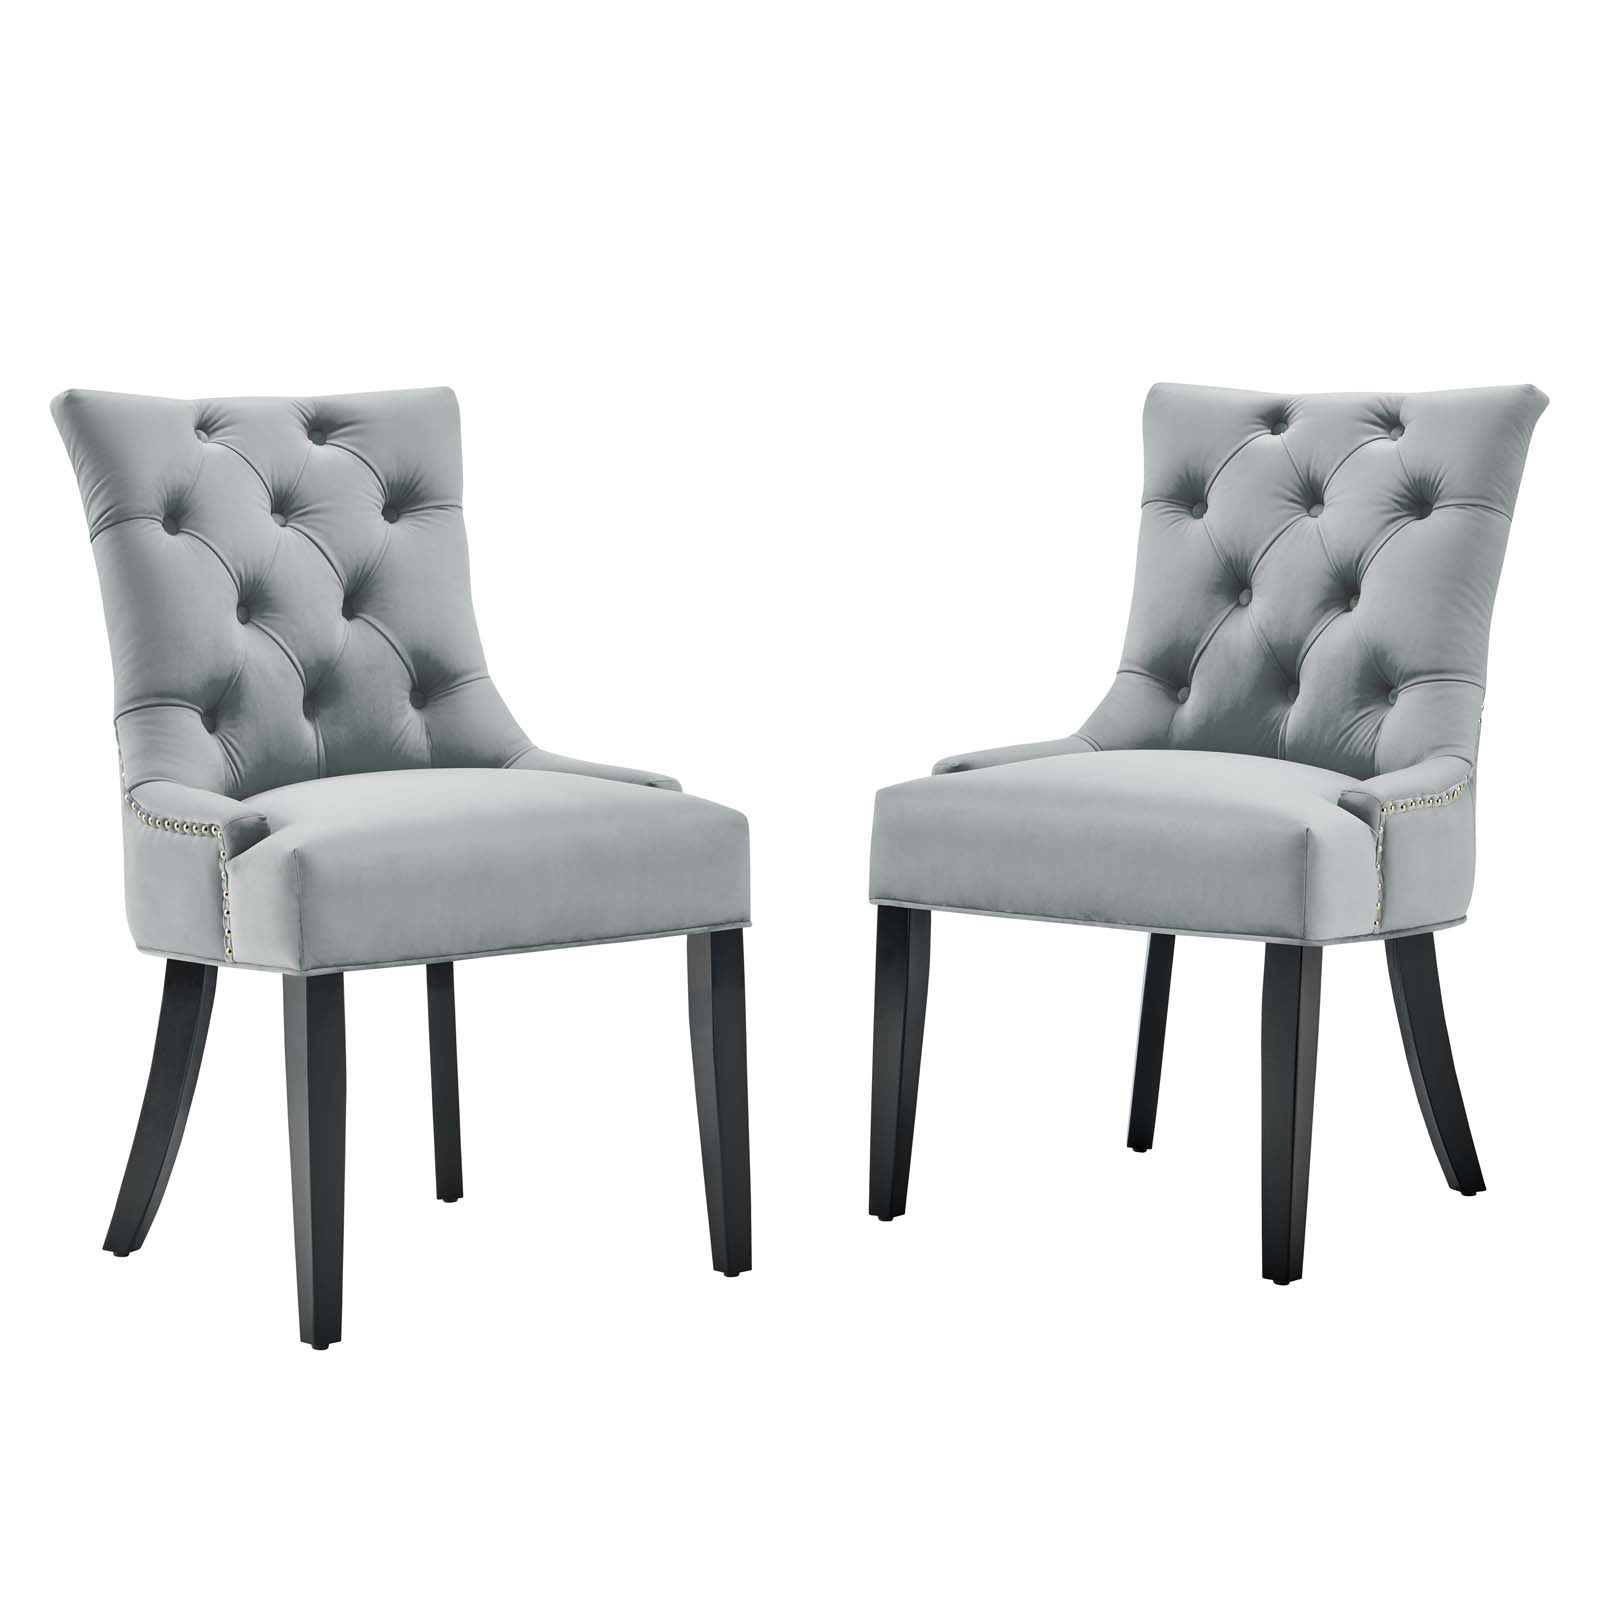 Modway Dining Chairs - Regent Tufted Performance Velvet Dining Side Chairs - Set of 2 Light Gray